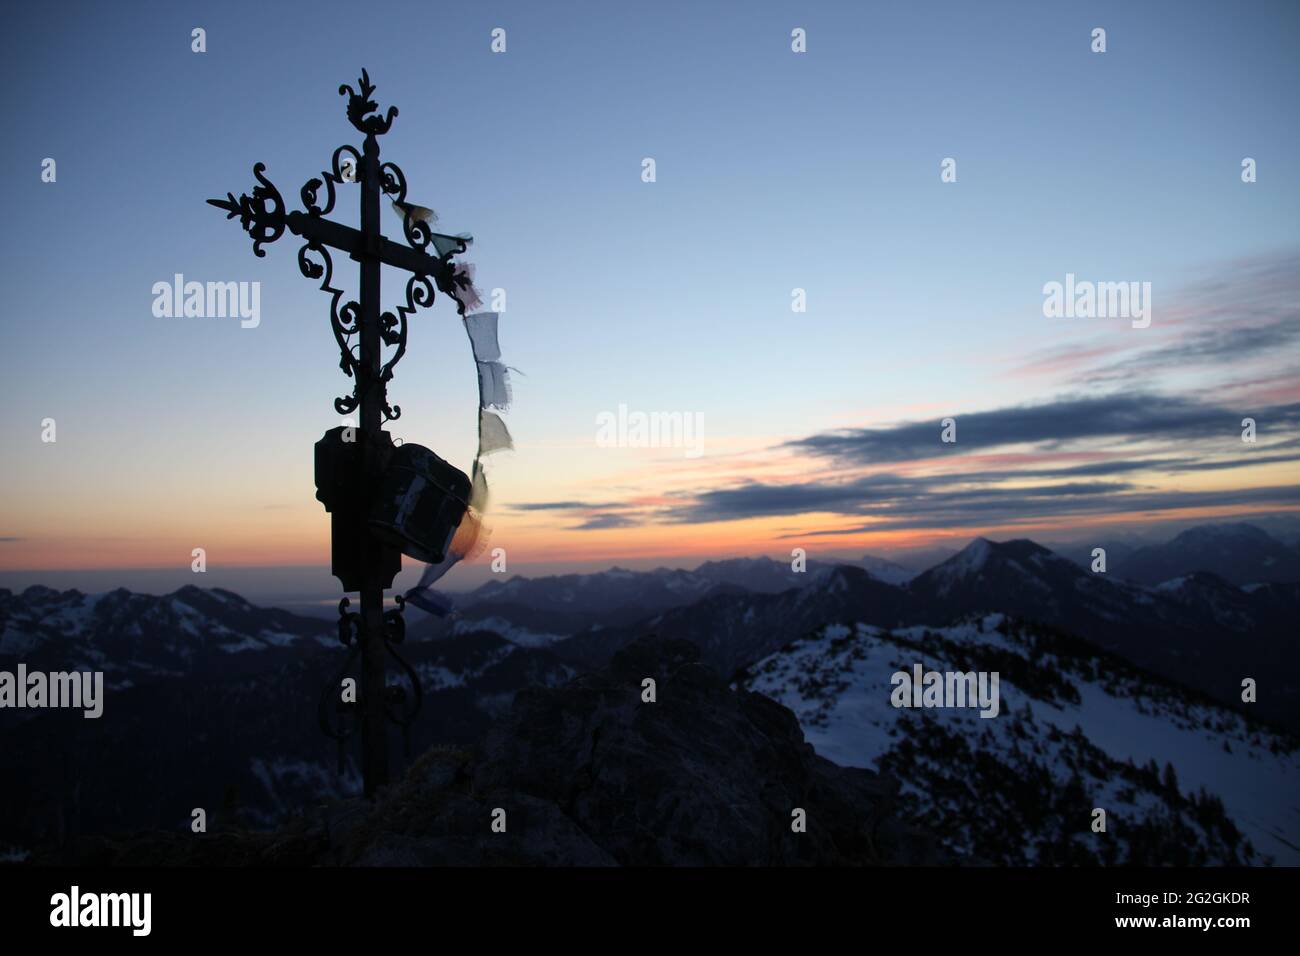 View from the Auerspitz (1811m) towards Chiemgau der Große Traithen (1851m) on the far right, the summit cross in front of the Chiemsee in anticipation of the rising sun, atmospheric, Europe, Germany, Bavaria, Upper Bavaria, Bavarian Alps, Mangfall Mountains, Spitzingsee Stock Photo